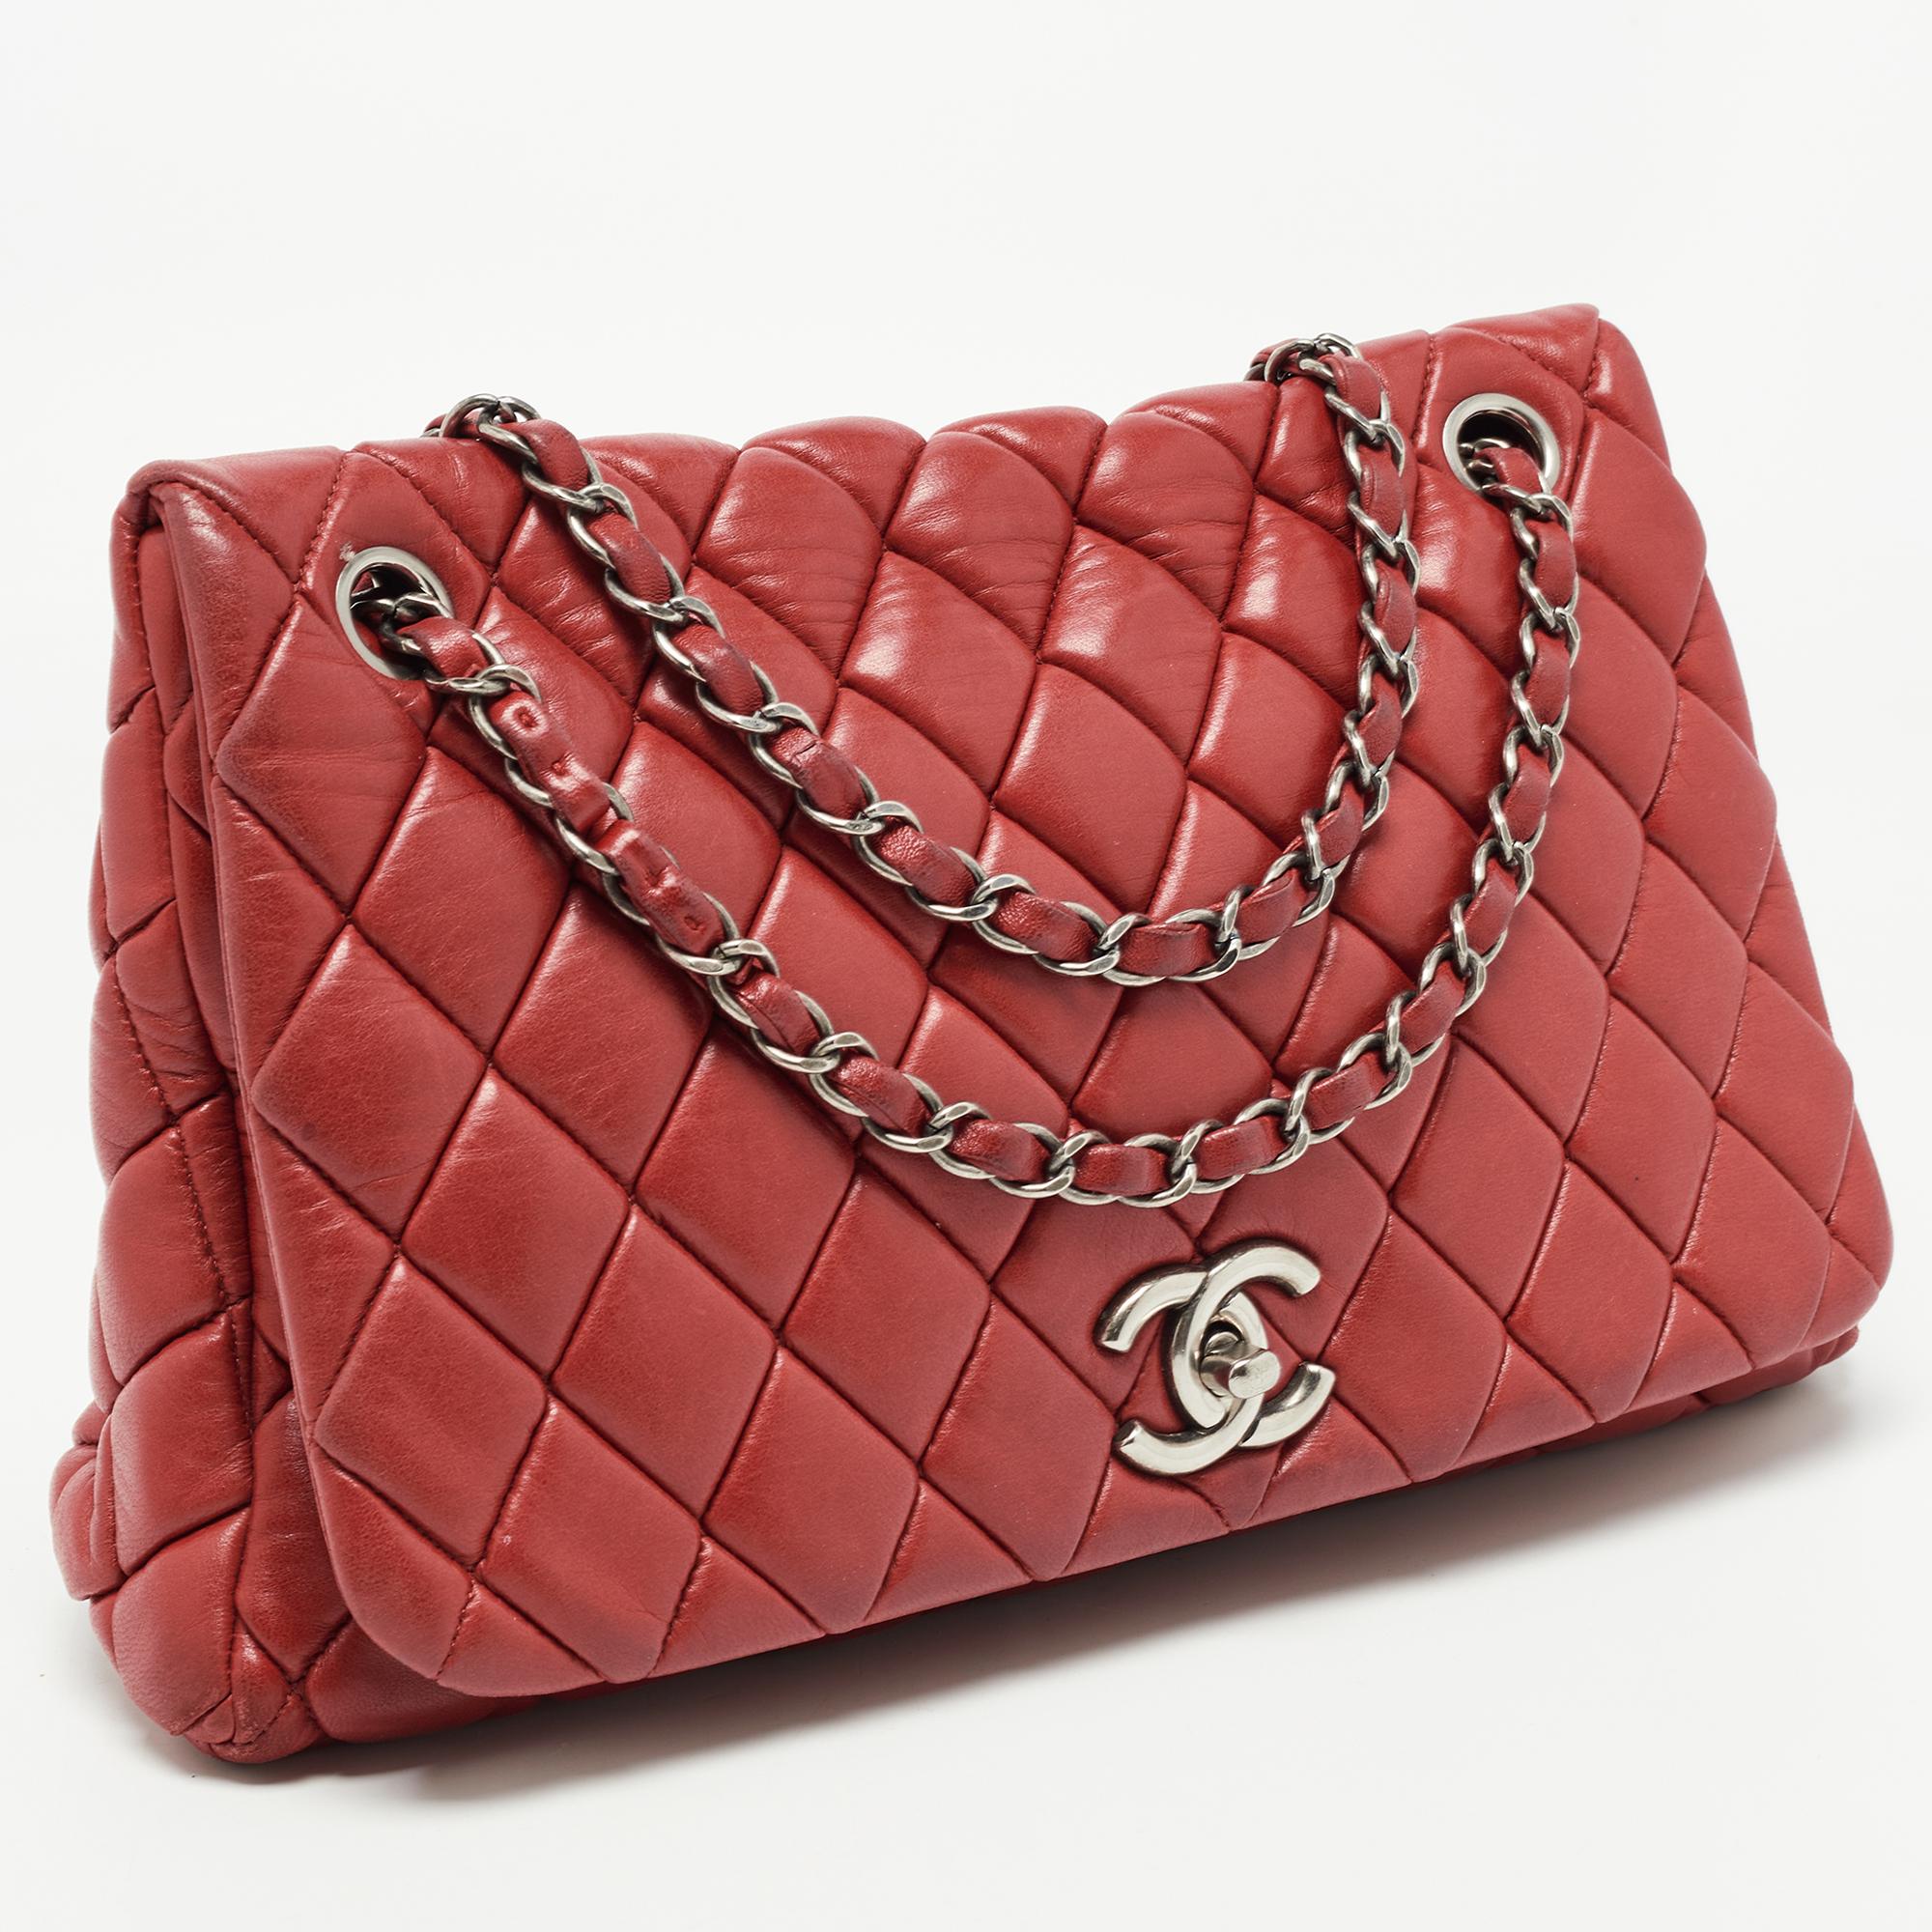 Chanel Red Bubble Quilted Leather Flap Shoulder Bag 9